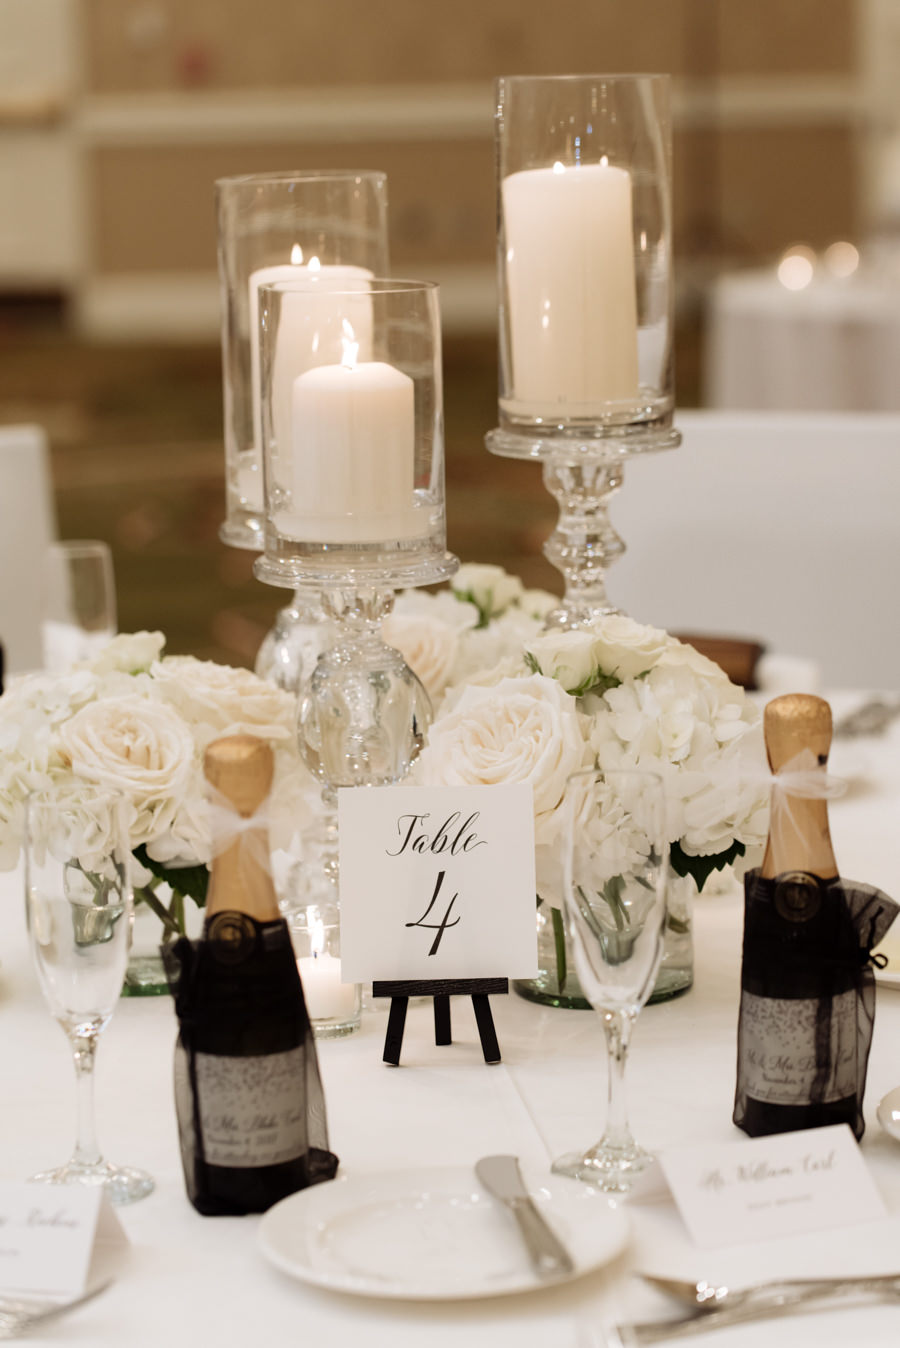 Elegant All White Ballroom Wedding Reception Decor with Candle and Rose Centerpieces and Mini Champagne Favors